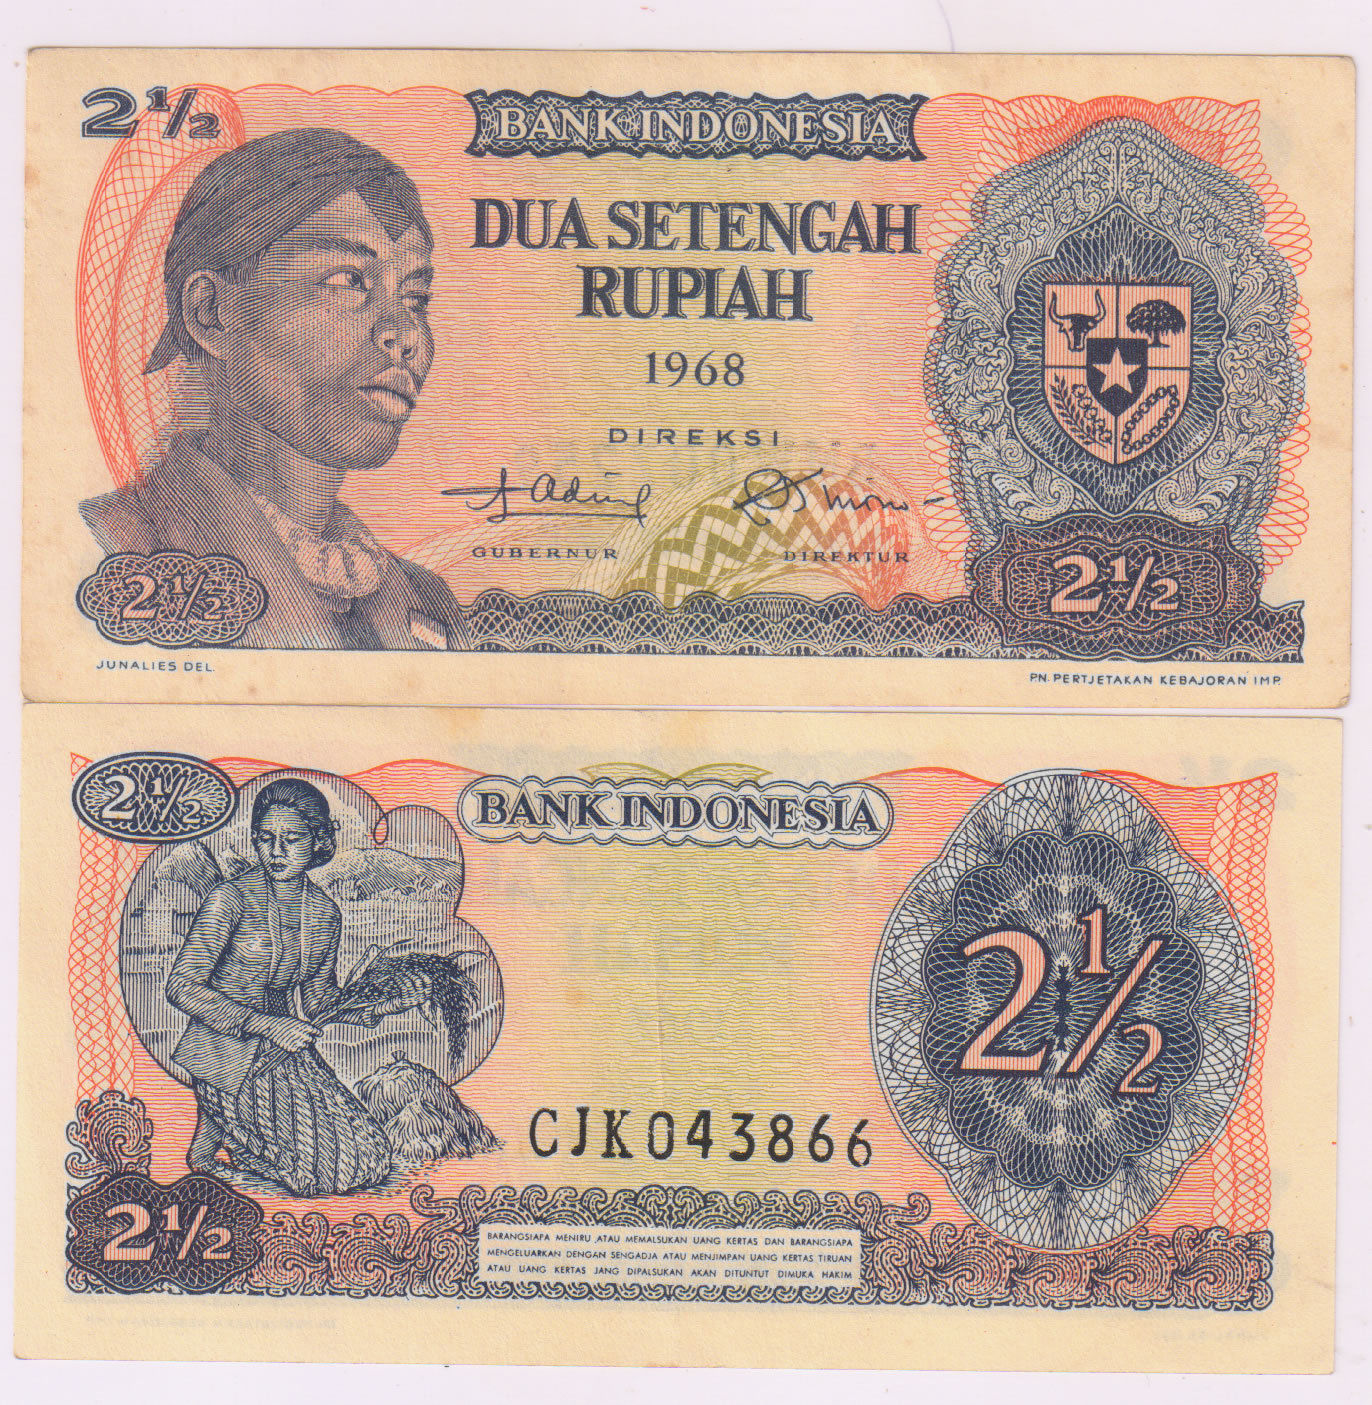  Indonesia  2 5 rupiah 1968 currency  note  KB Coins 